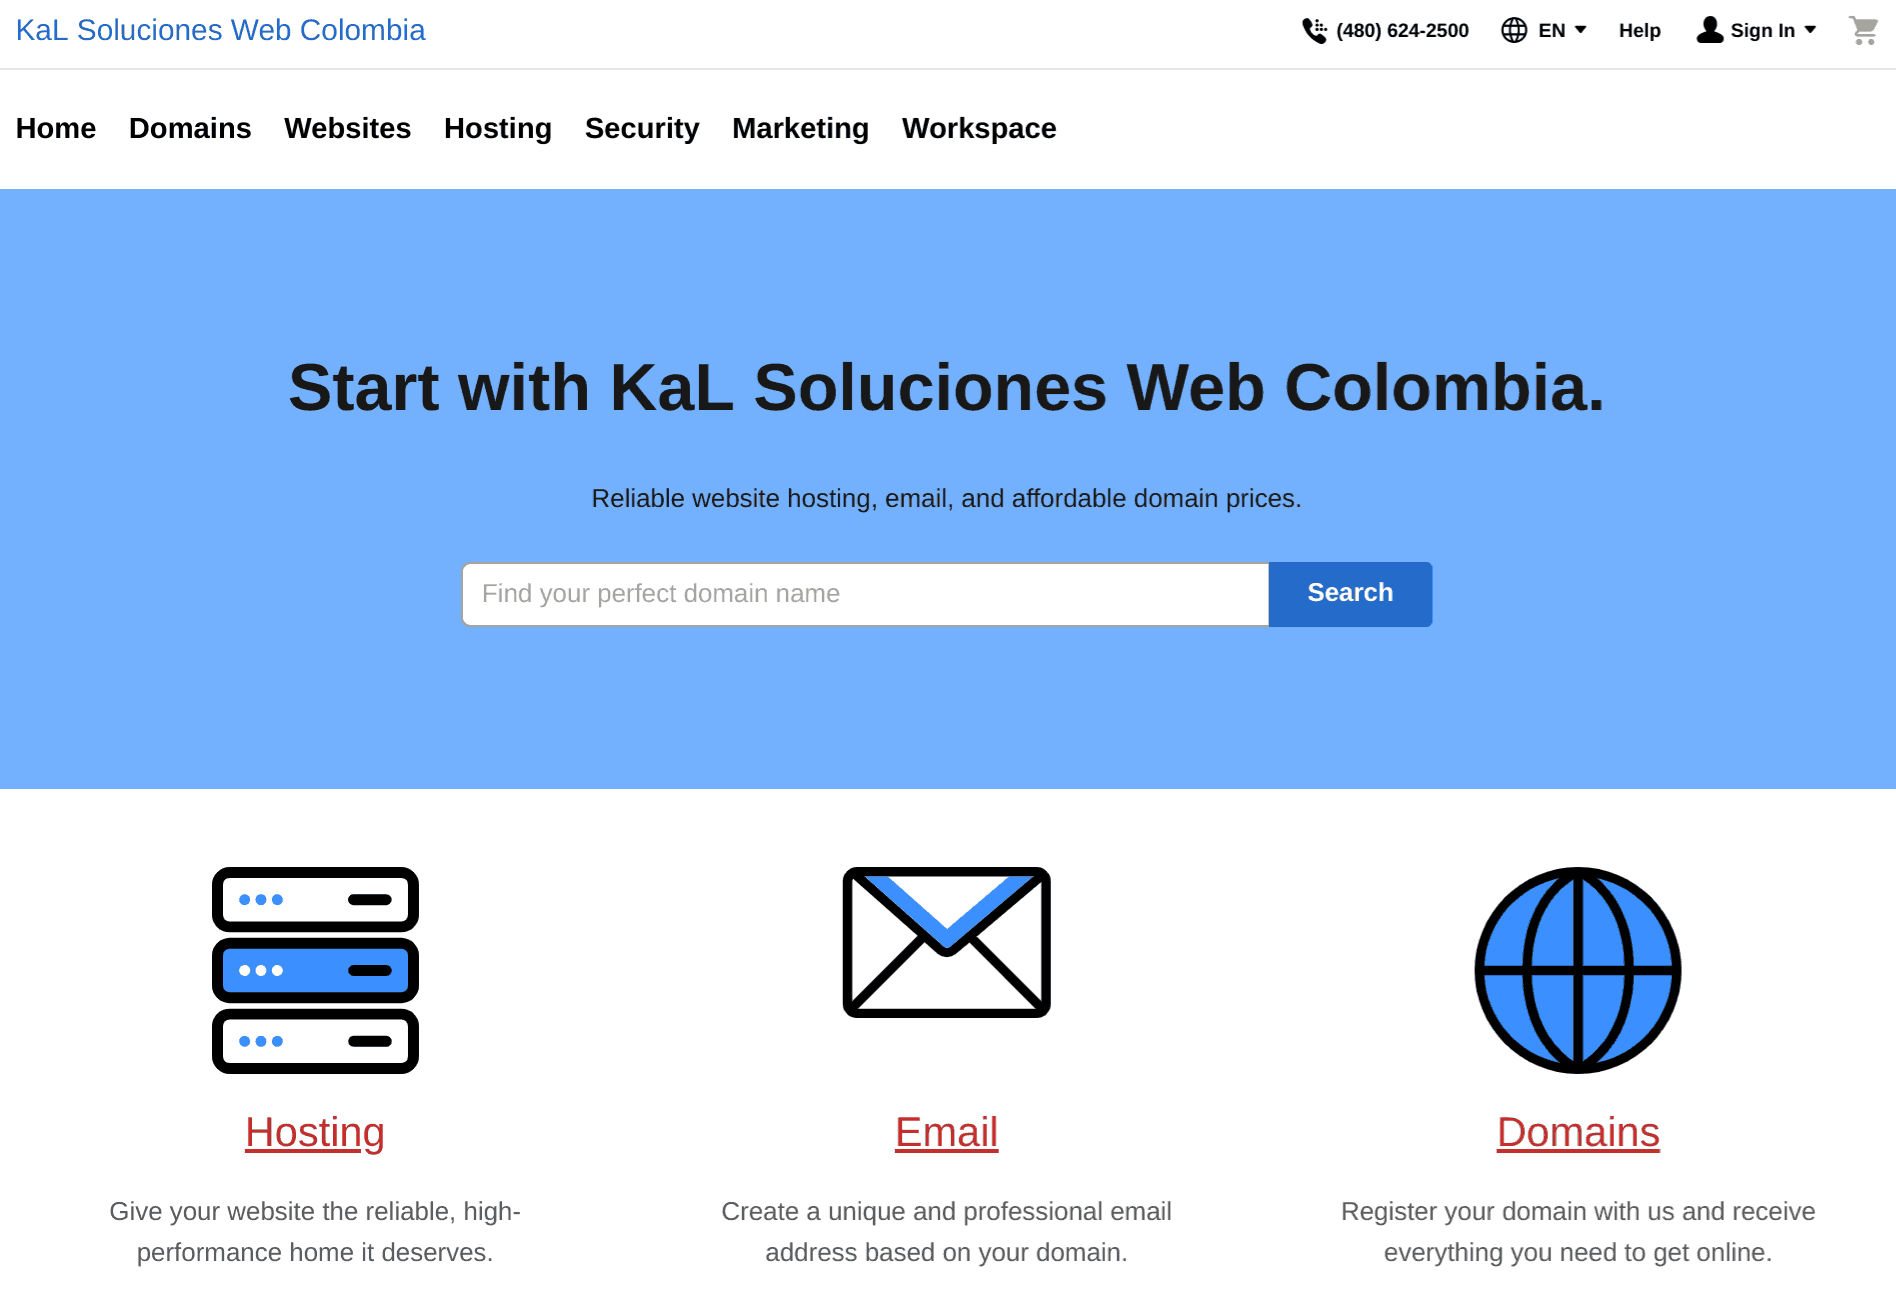 KaL Soluciones Web Colombia overview1